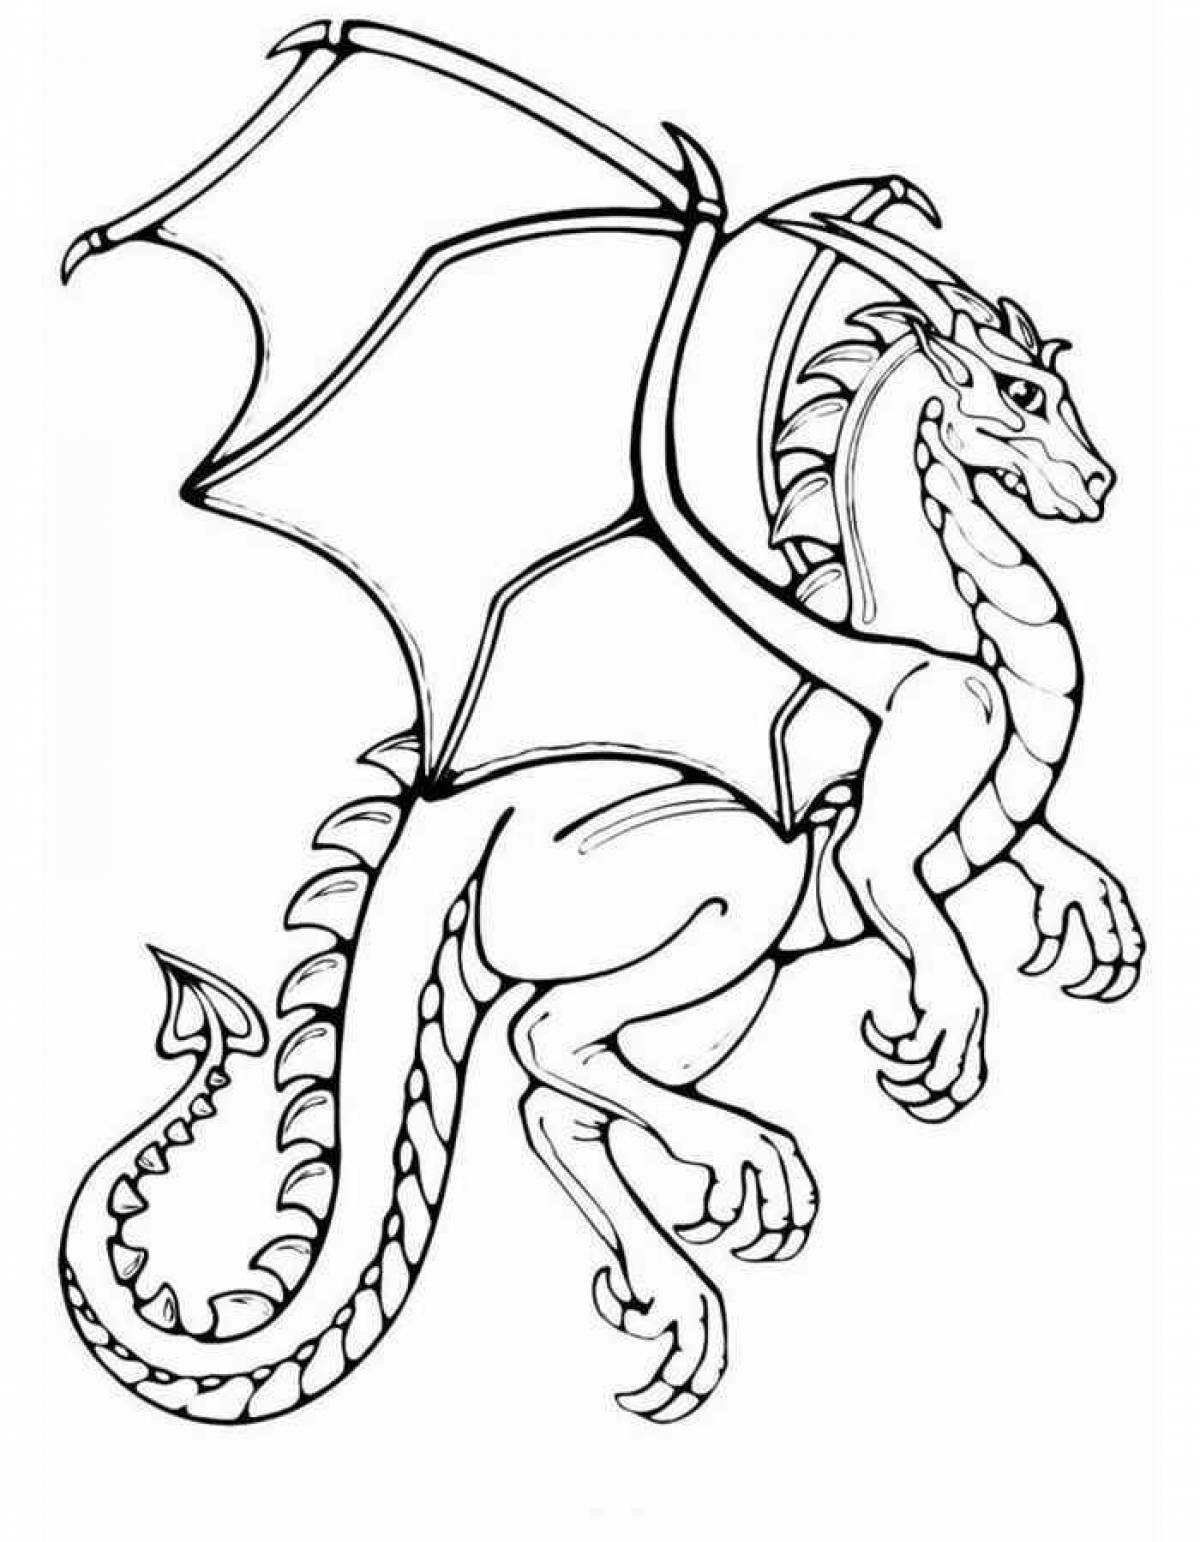 Scary dragon coloring book for kids